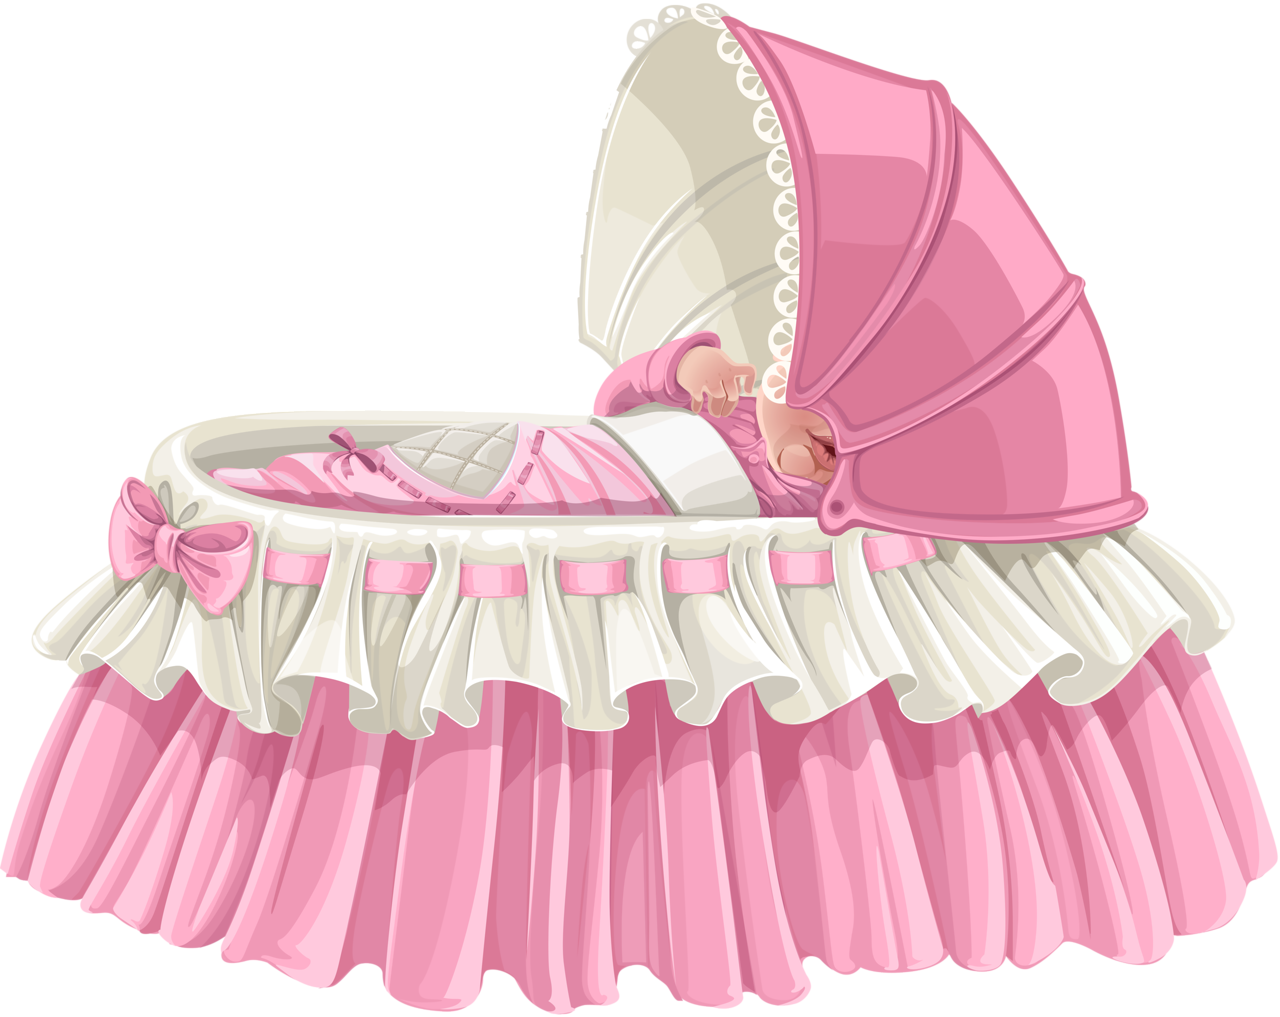  png babies baby. Girls clipart bed